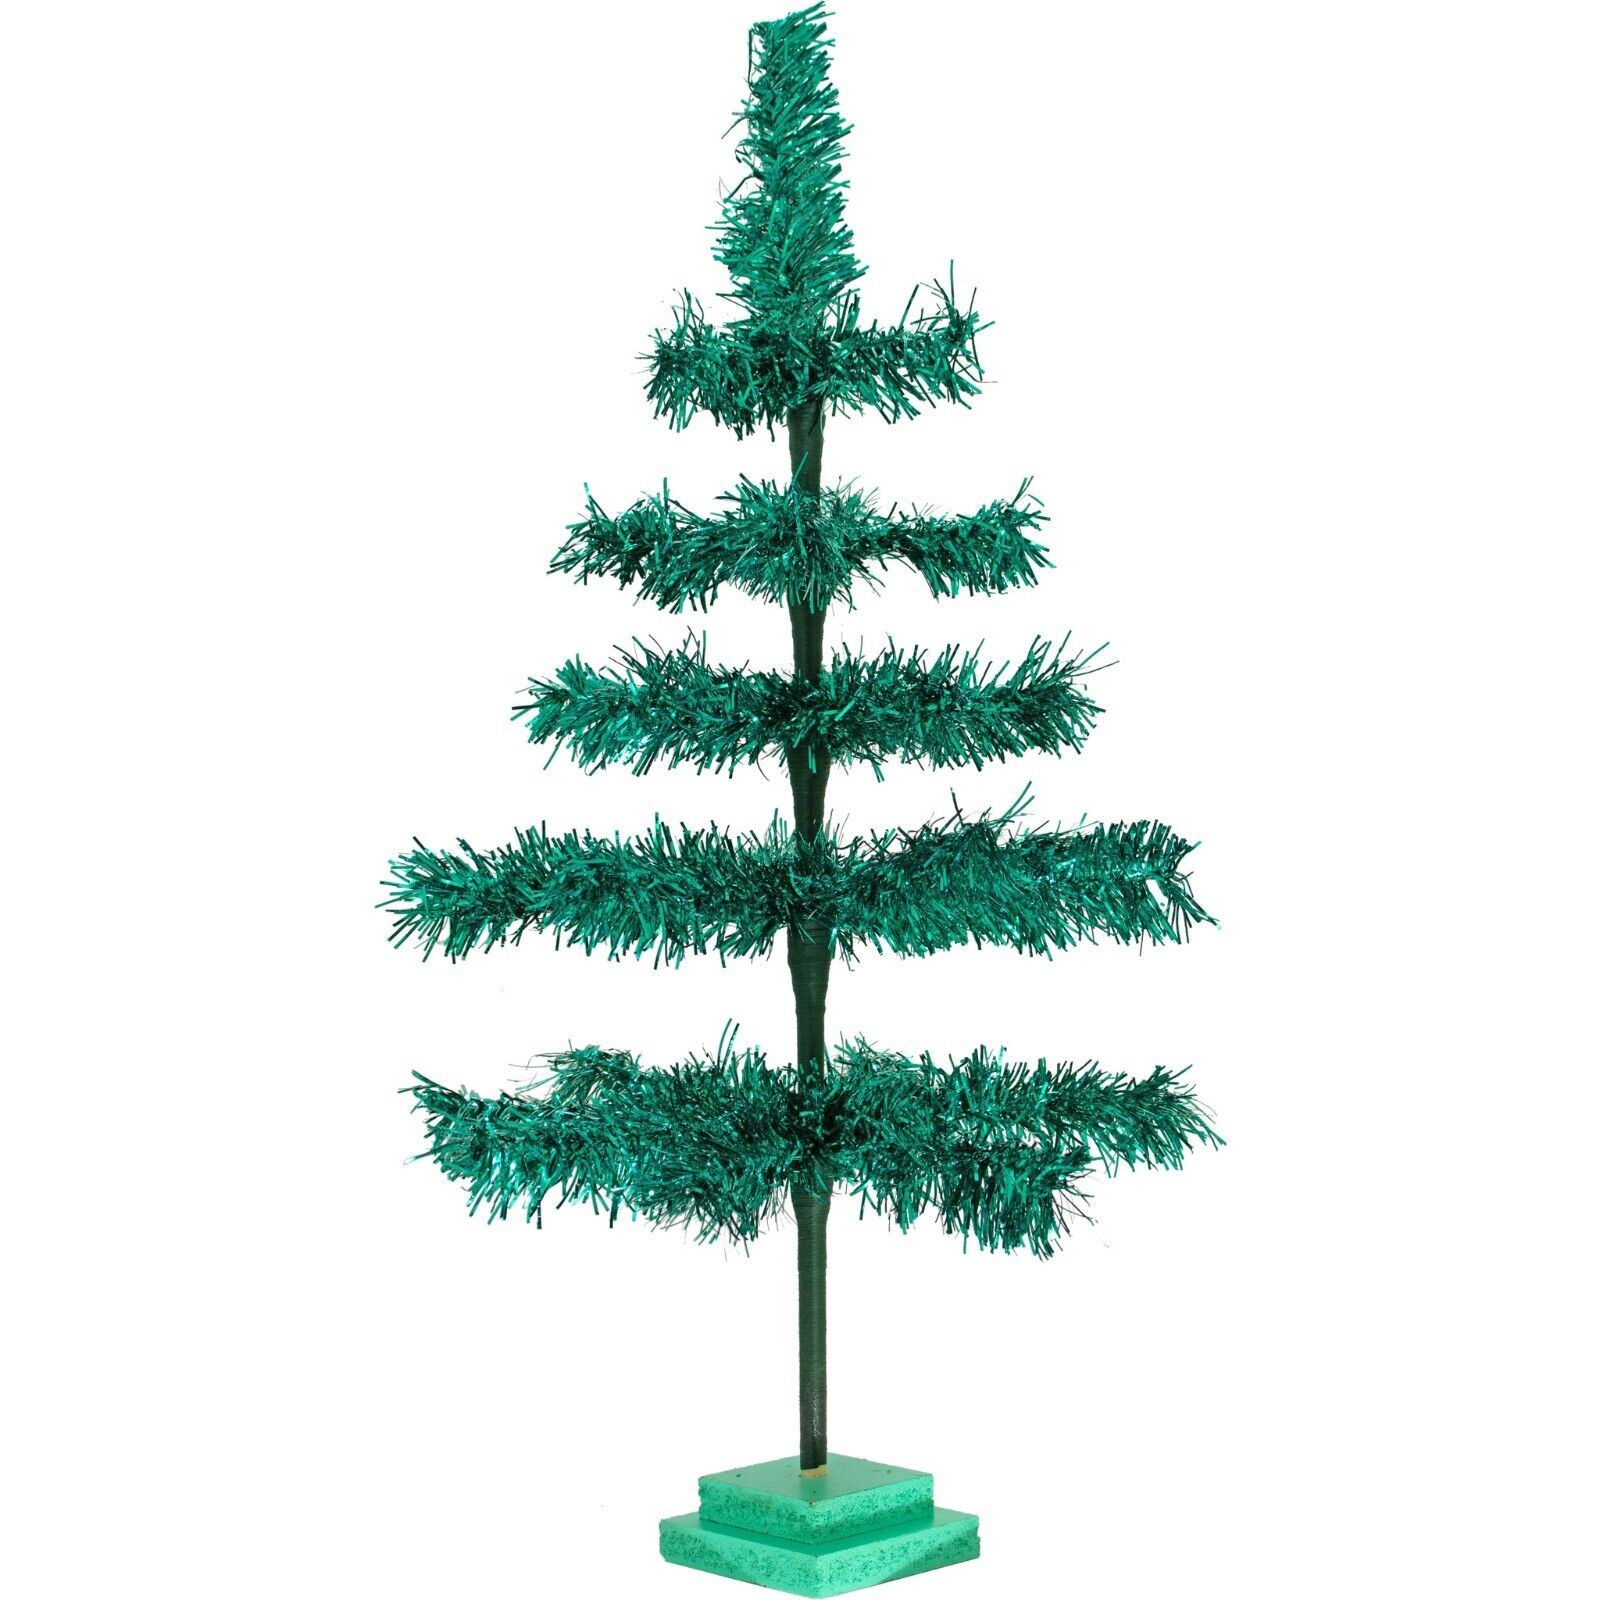 28in Tall Vintage Emerald Green Tinsel Christmas Tree, Wood Stand Included